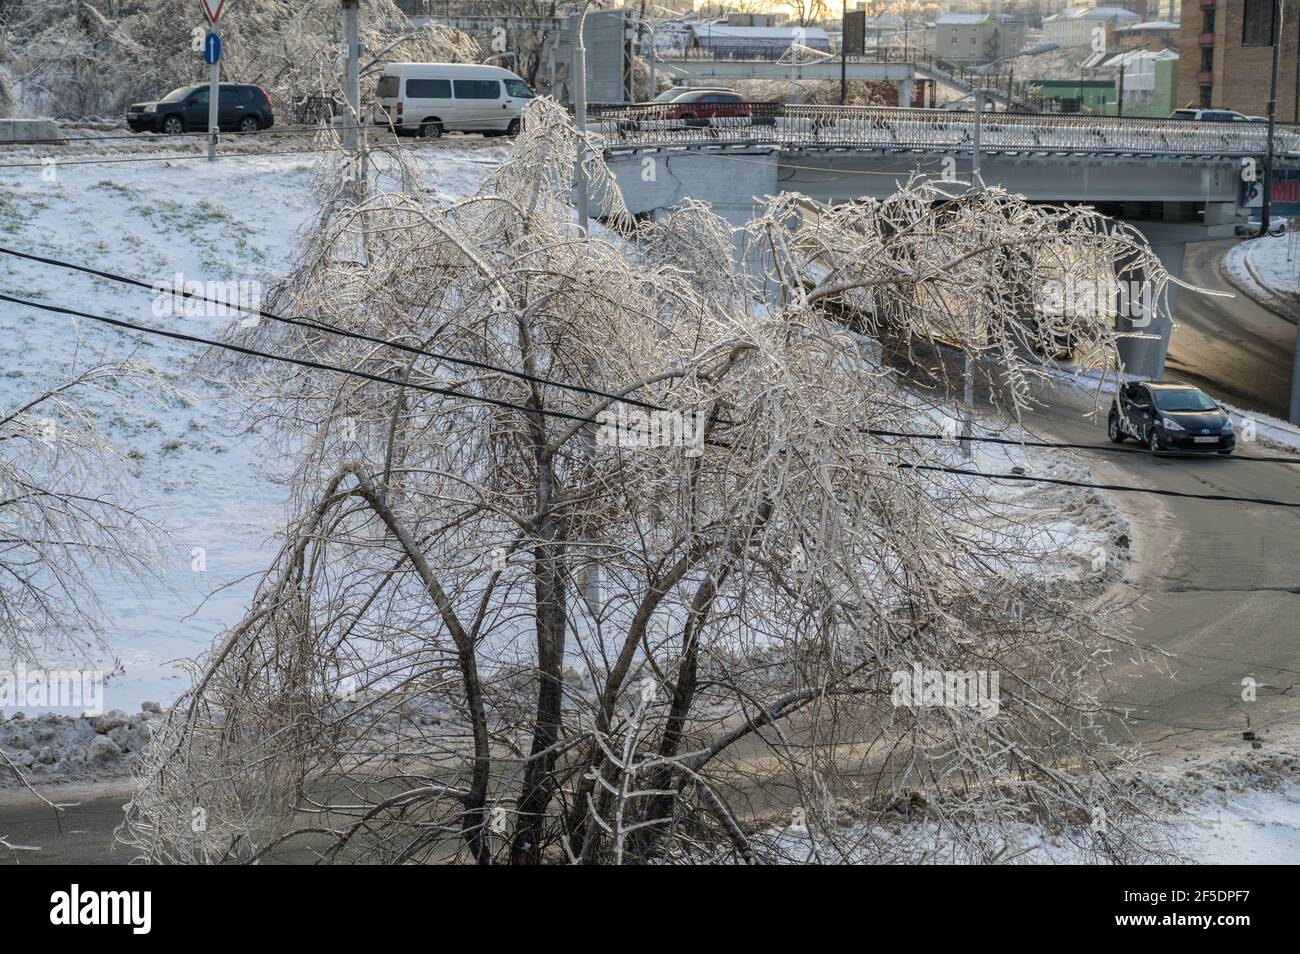 VLADIVOSTOK, RUSSIA - NOVEMBER 23, 2020: Trees are covered with a crust of ice after icy rain. Natural disaster. Stock Photo